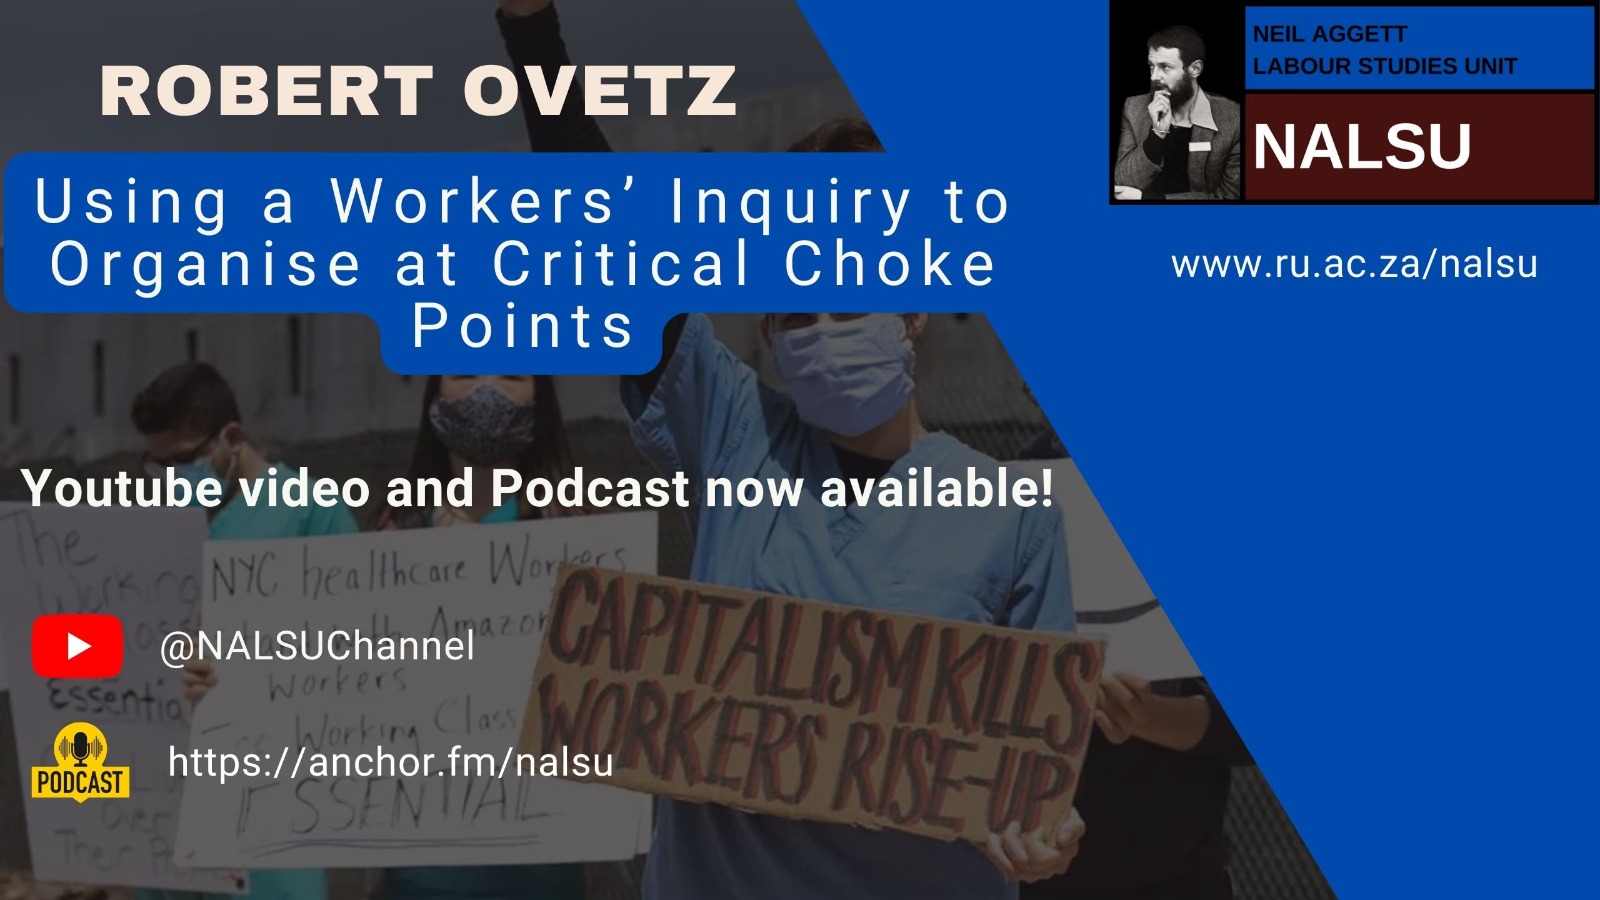 “Using a Workers’ Inquiry to Organise at Critical Choke Points"
